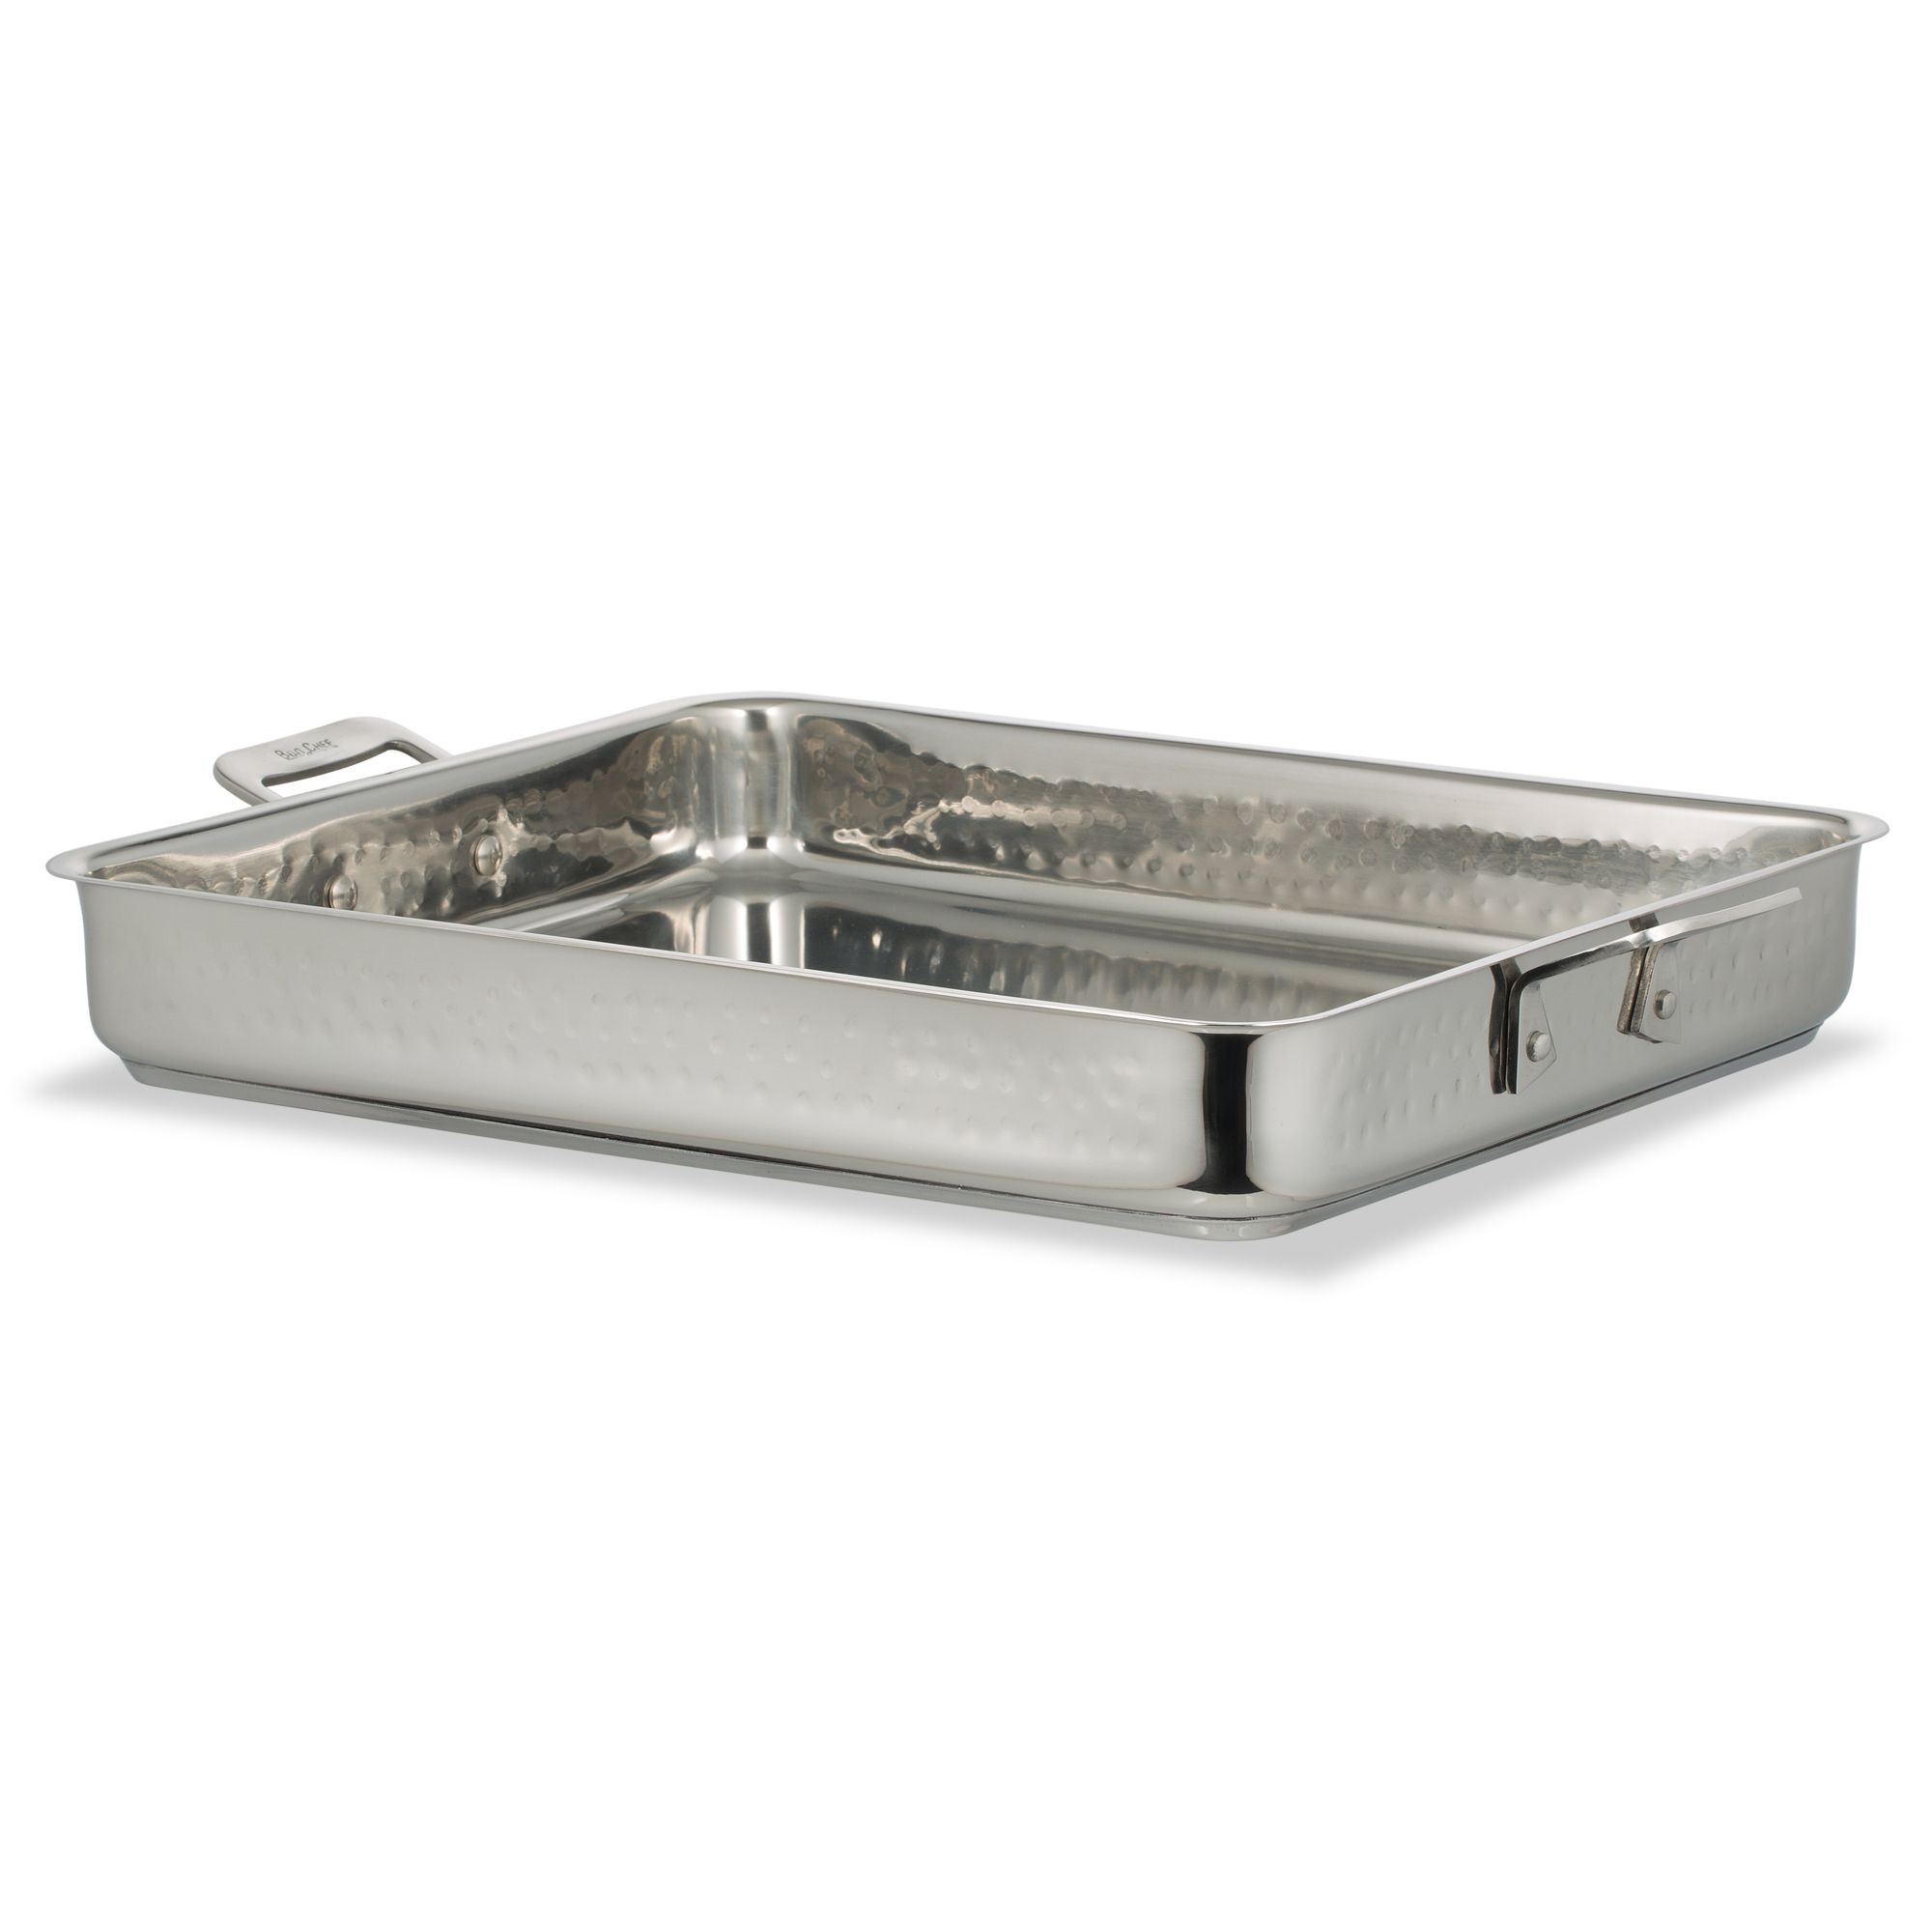 Bon Chef 60012CLDHF Cucina Large Stainless Steel Square Pan, Hammered Finish, 5 Qt.